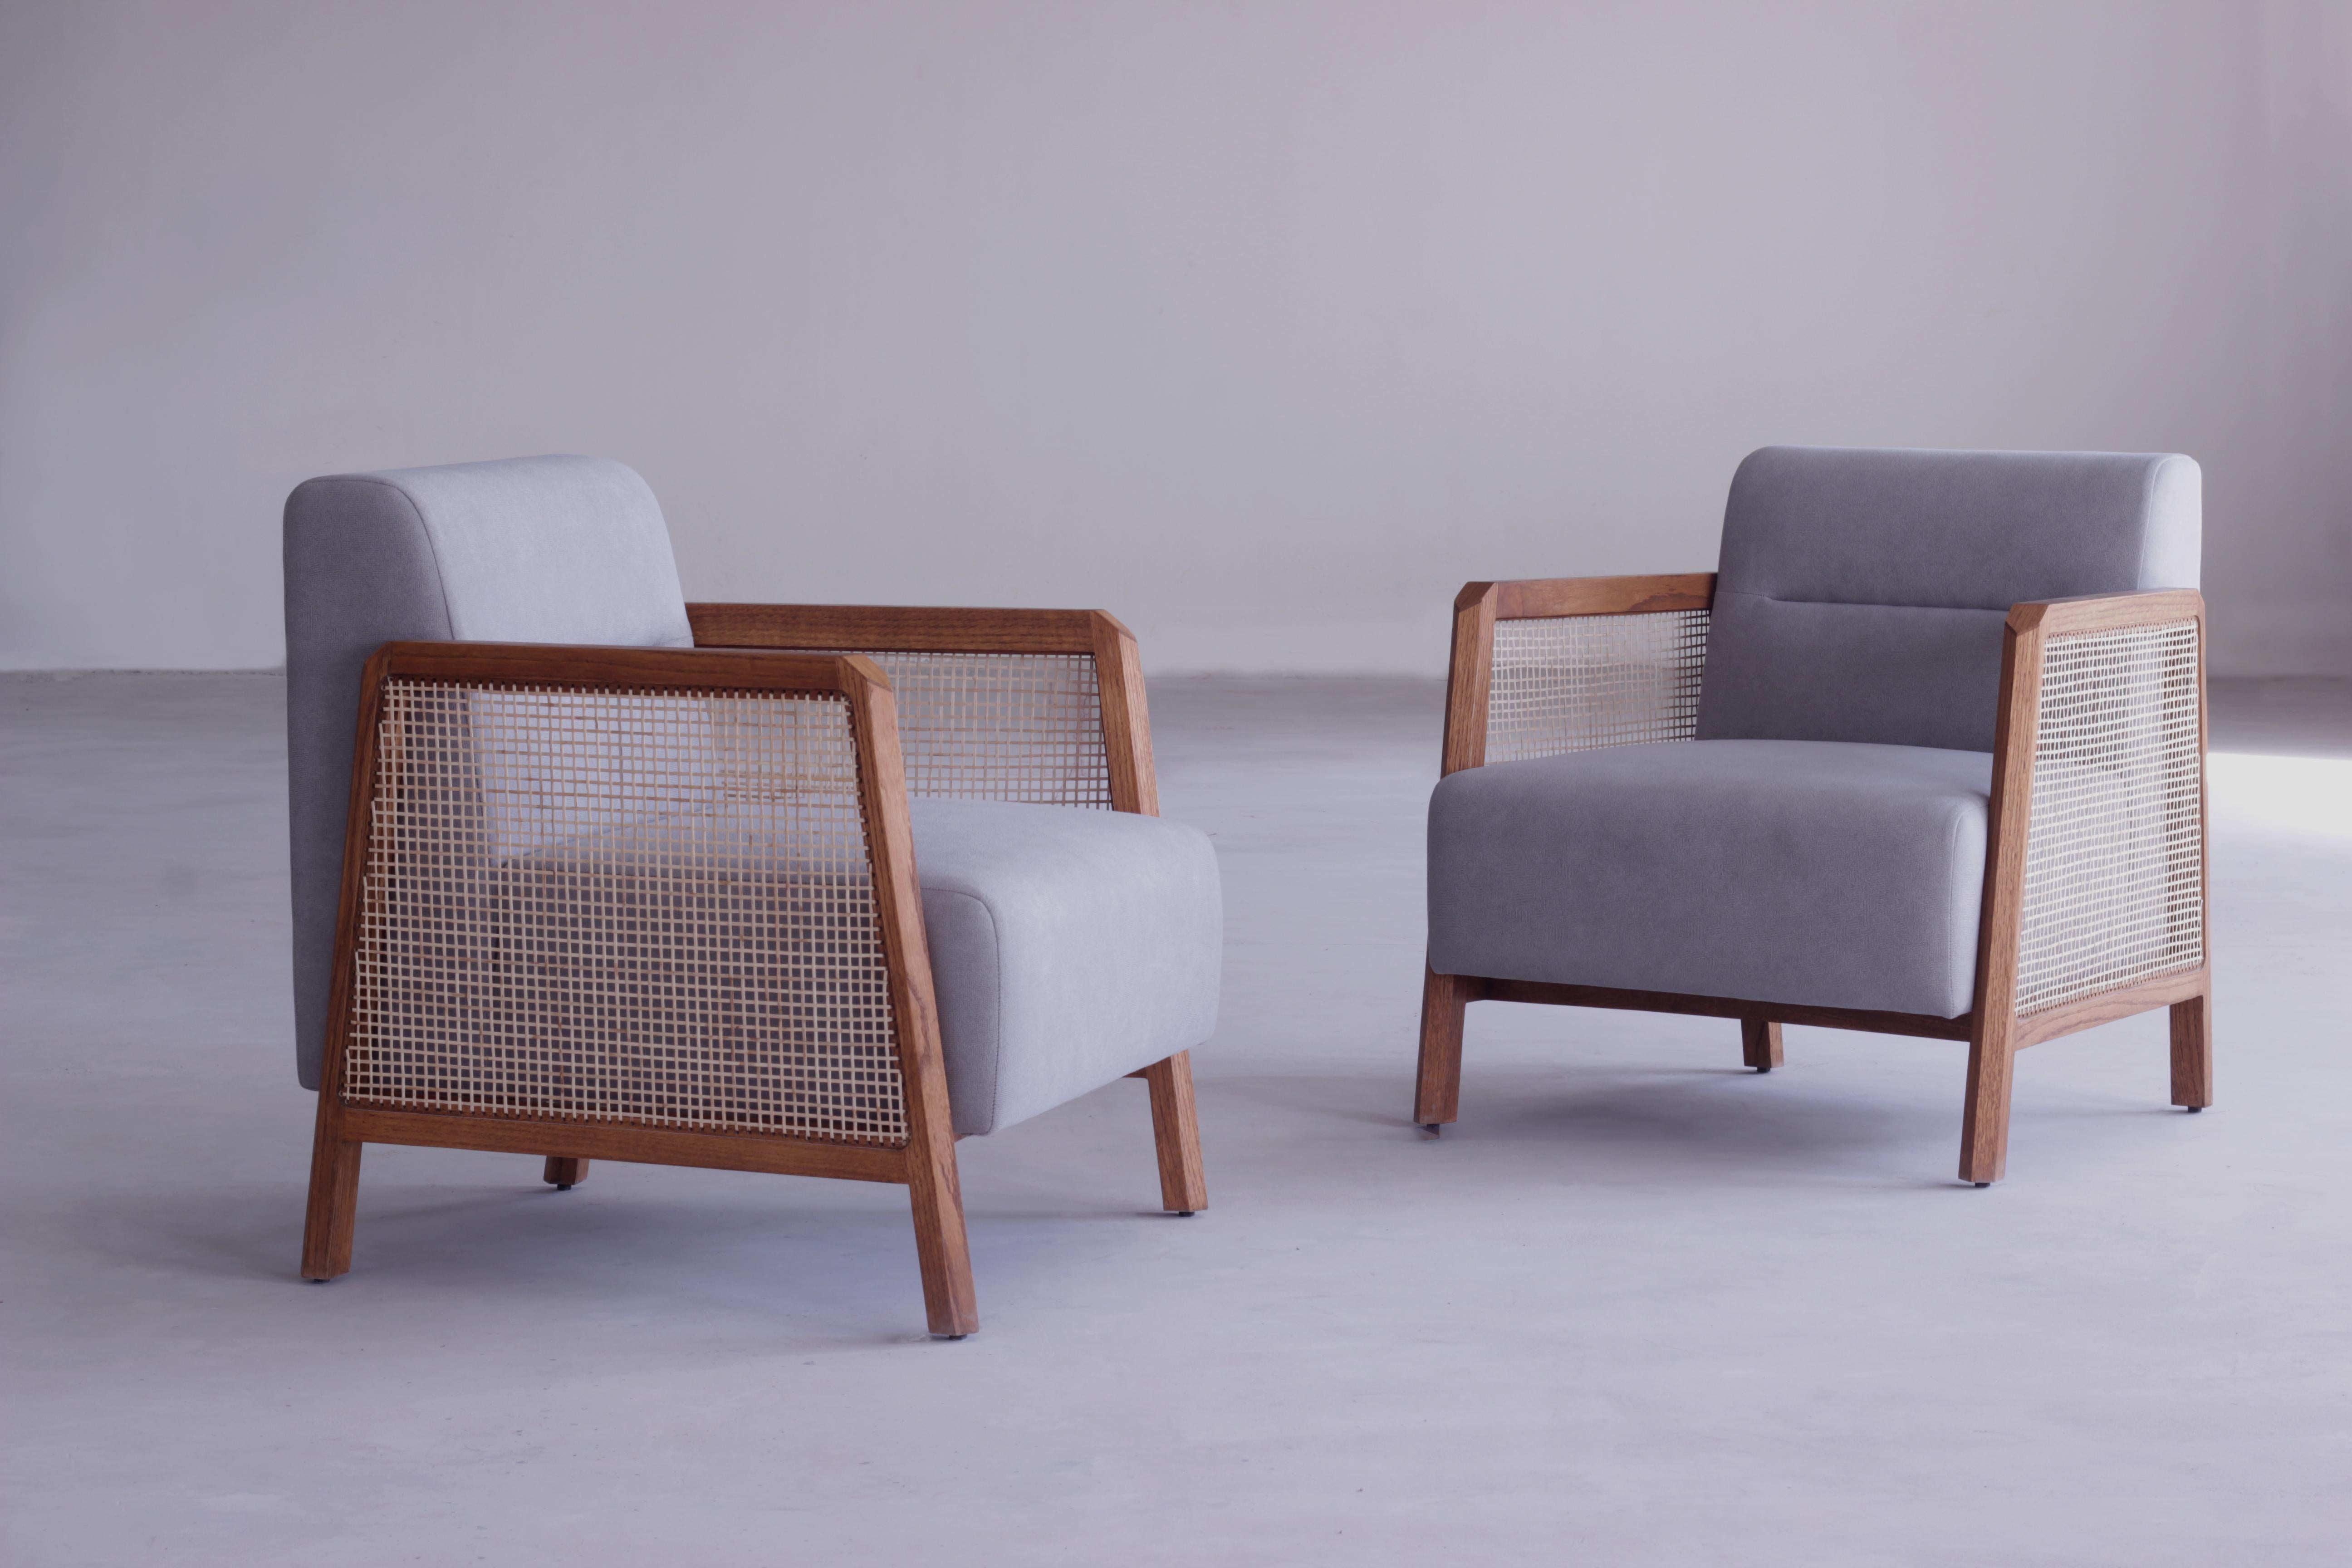 Minimal Modern Lounge Armchair in Solid Wood Oak and Natural Woven Cane In New Condition For Sale In Hyderabad, TG